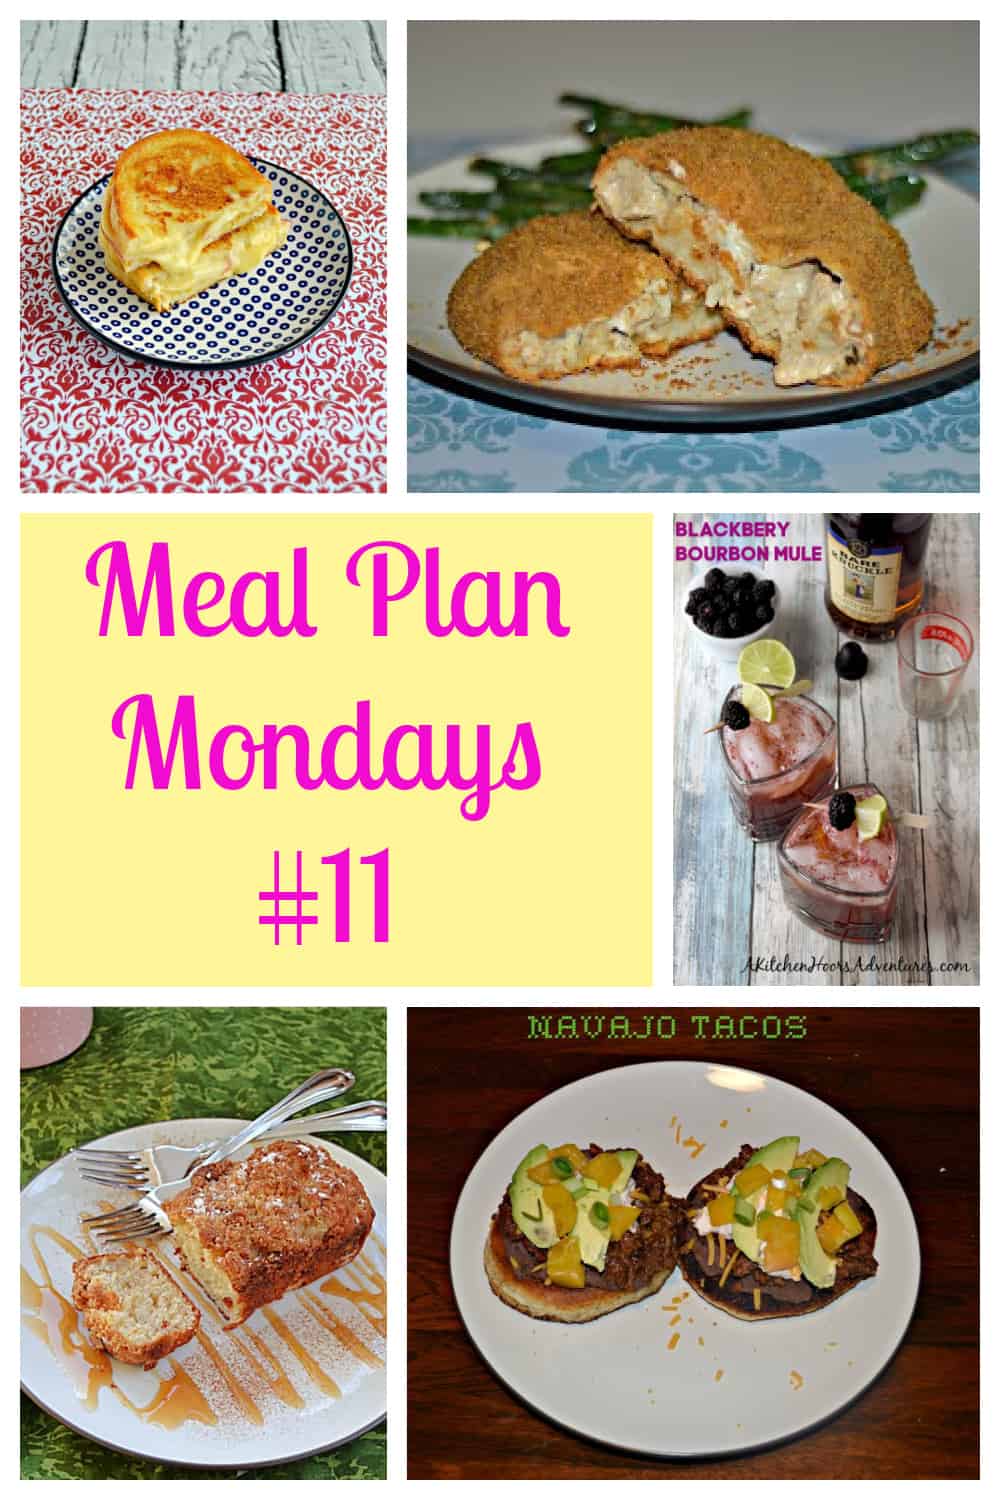 Meal Plan Mondays #11: Easy Recipes for Weeknight Meals